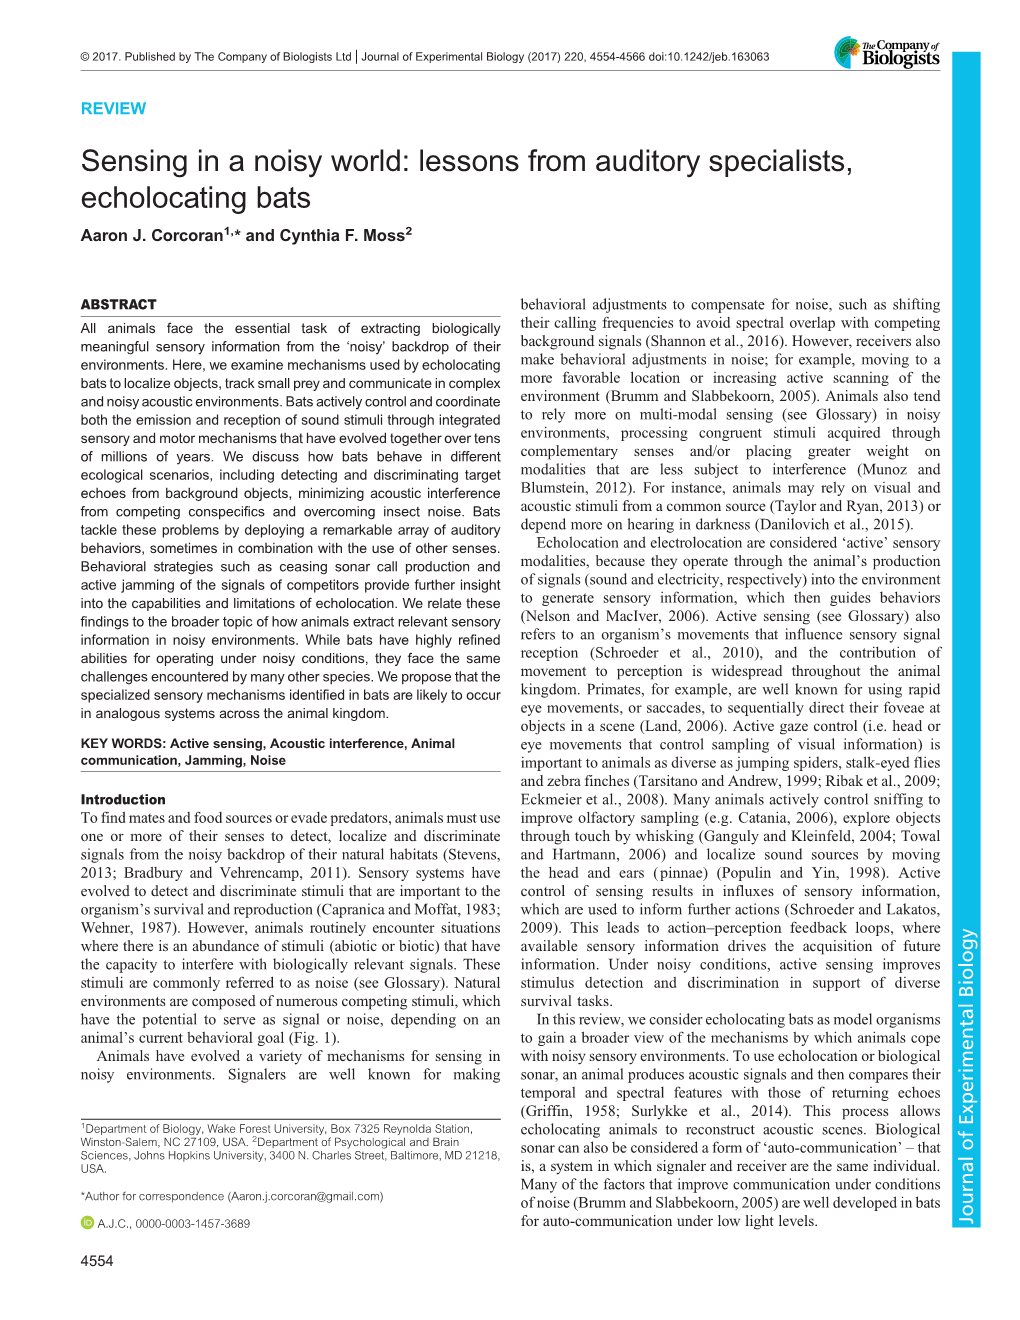 Sensing in a Noisy World: Lessons from Auditory Specialists, Echolocating Bats Aaron J